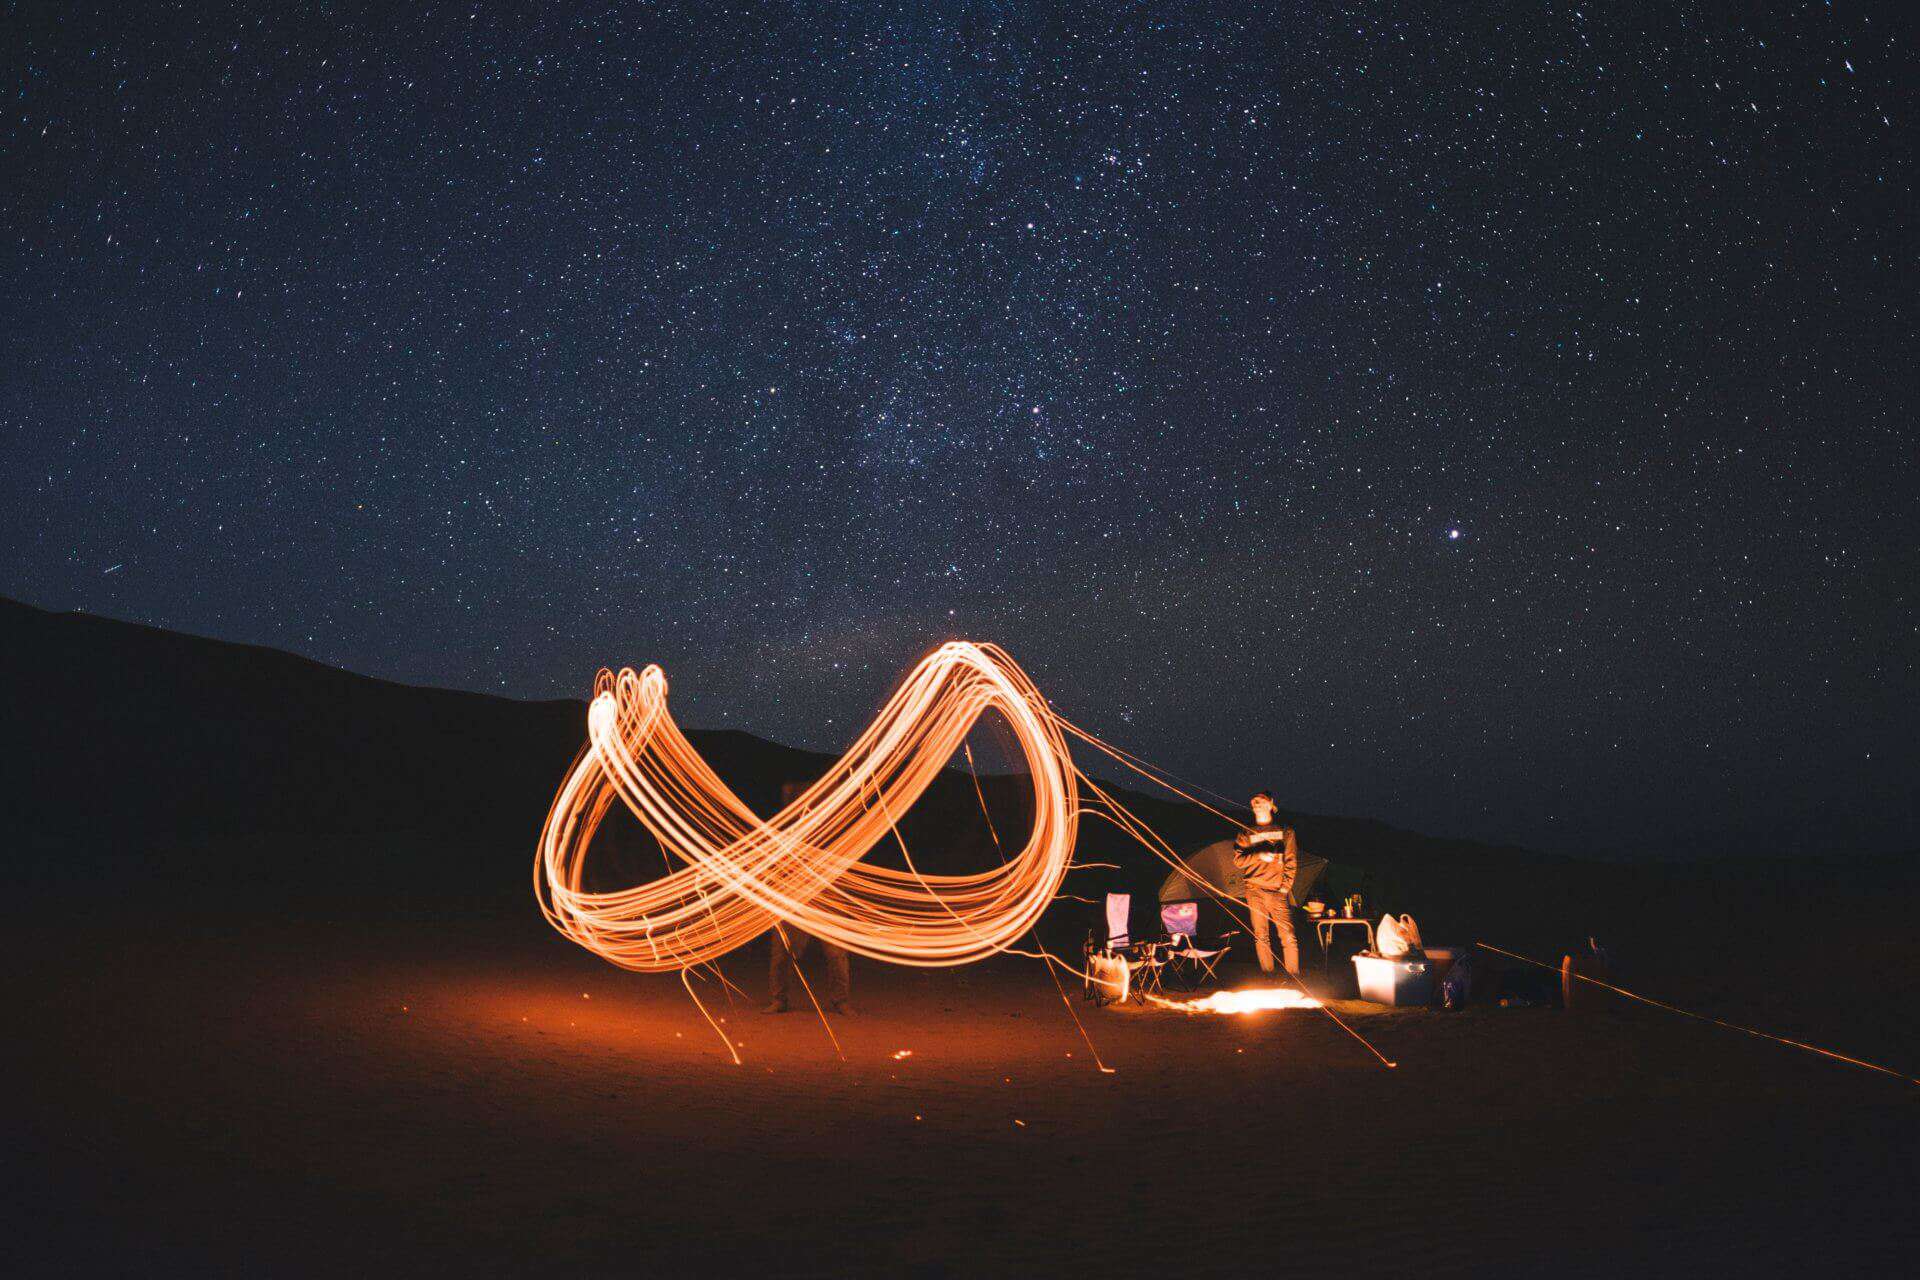 A lone camper under a starry sky creates a light trail with a spinning device, lending a magical atmosphere to a peaceful night in the wilderness.